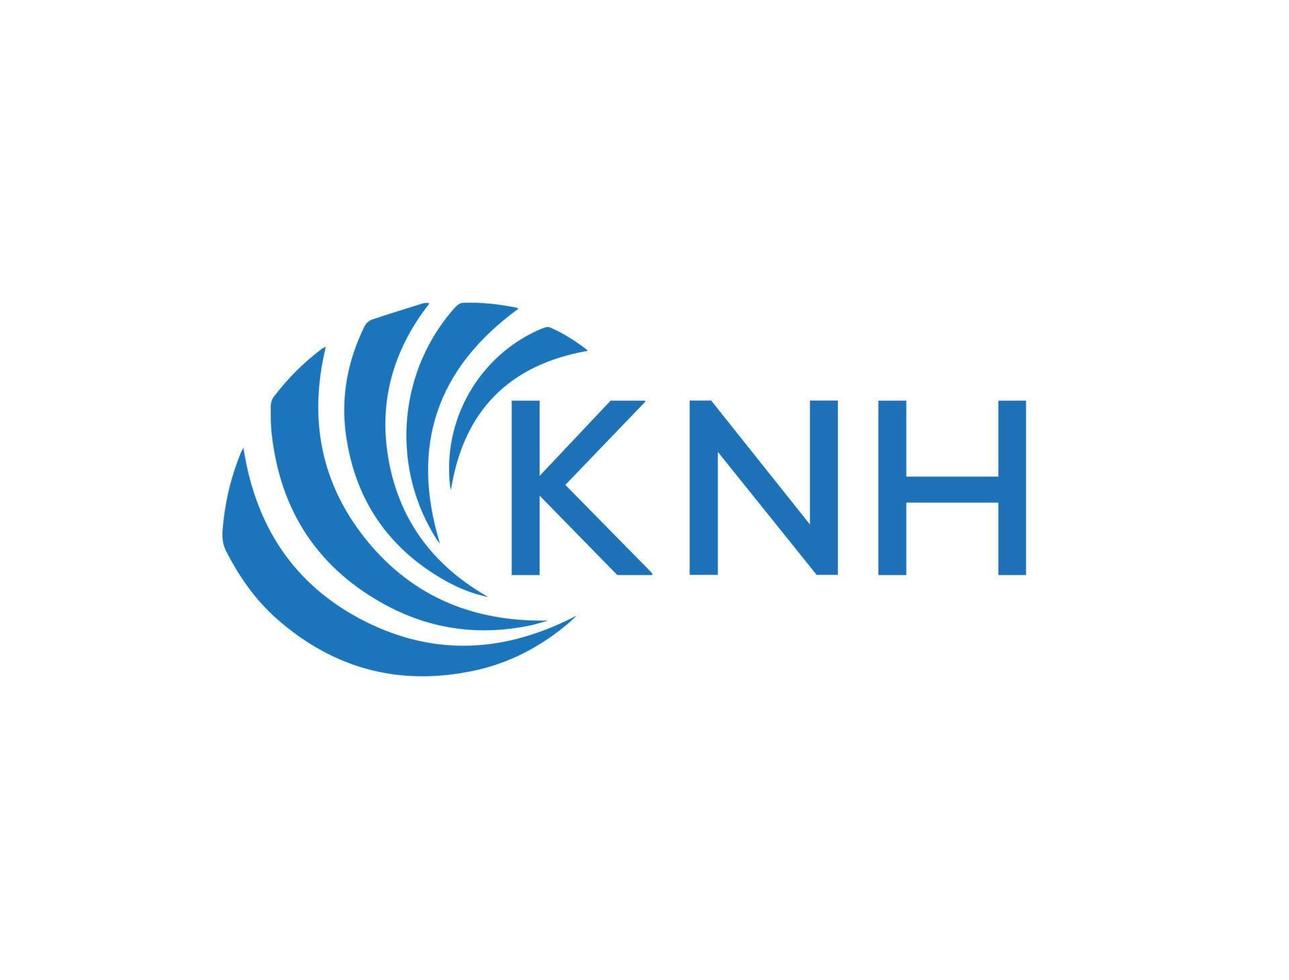 KNH abstract business growth logo design on white background. KNH creative initials letter logo concept. vector